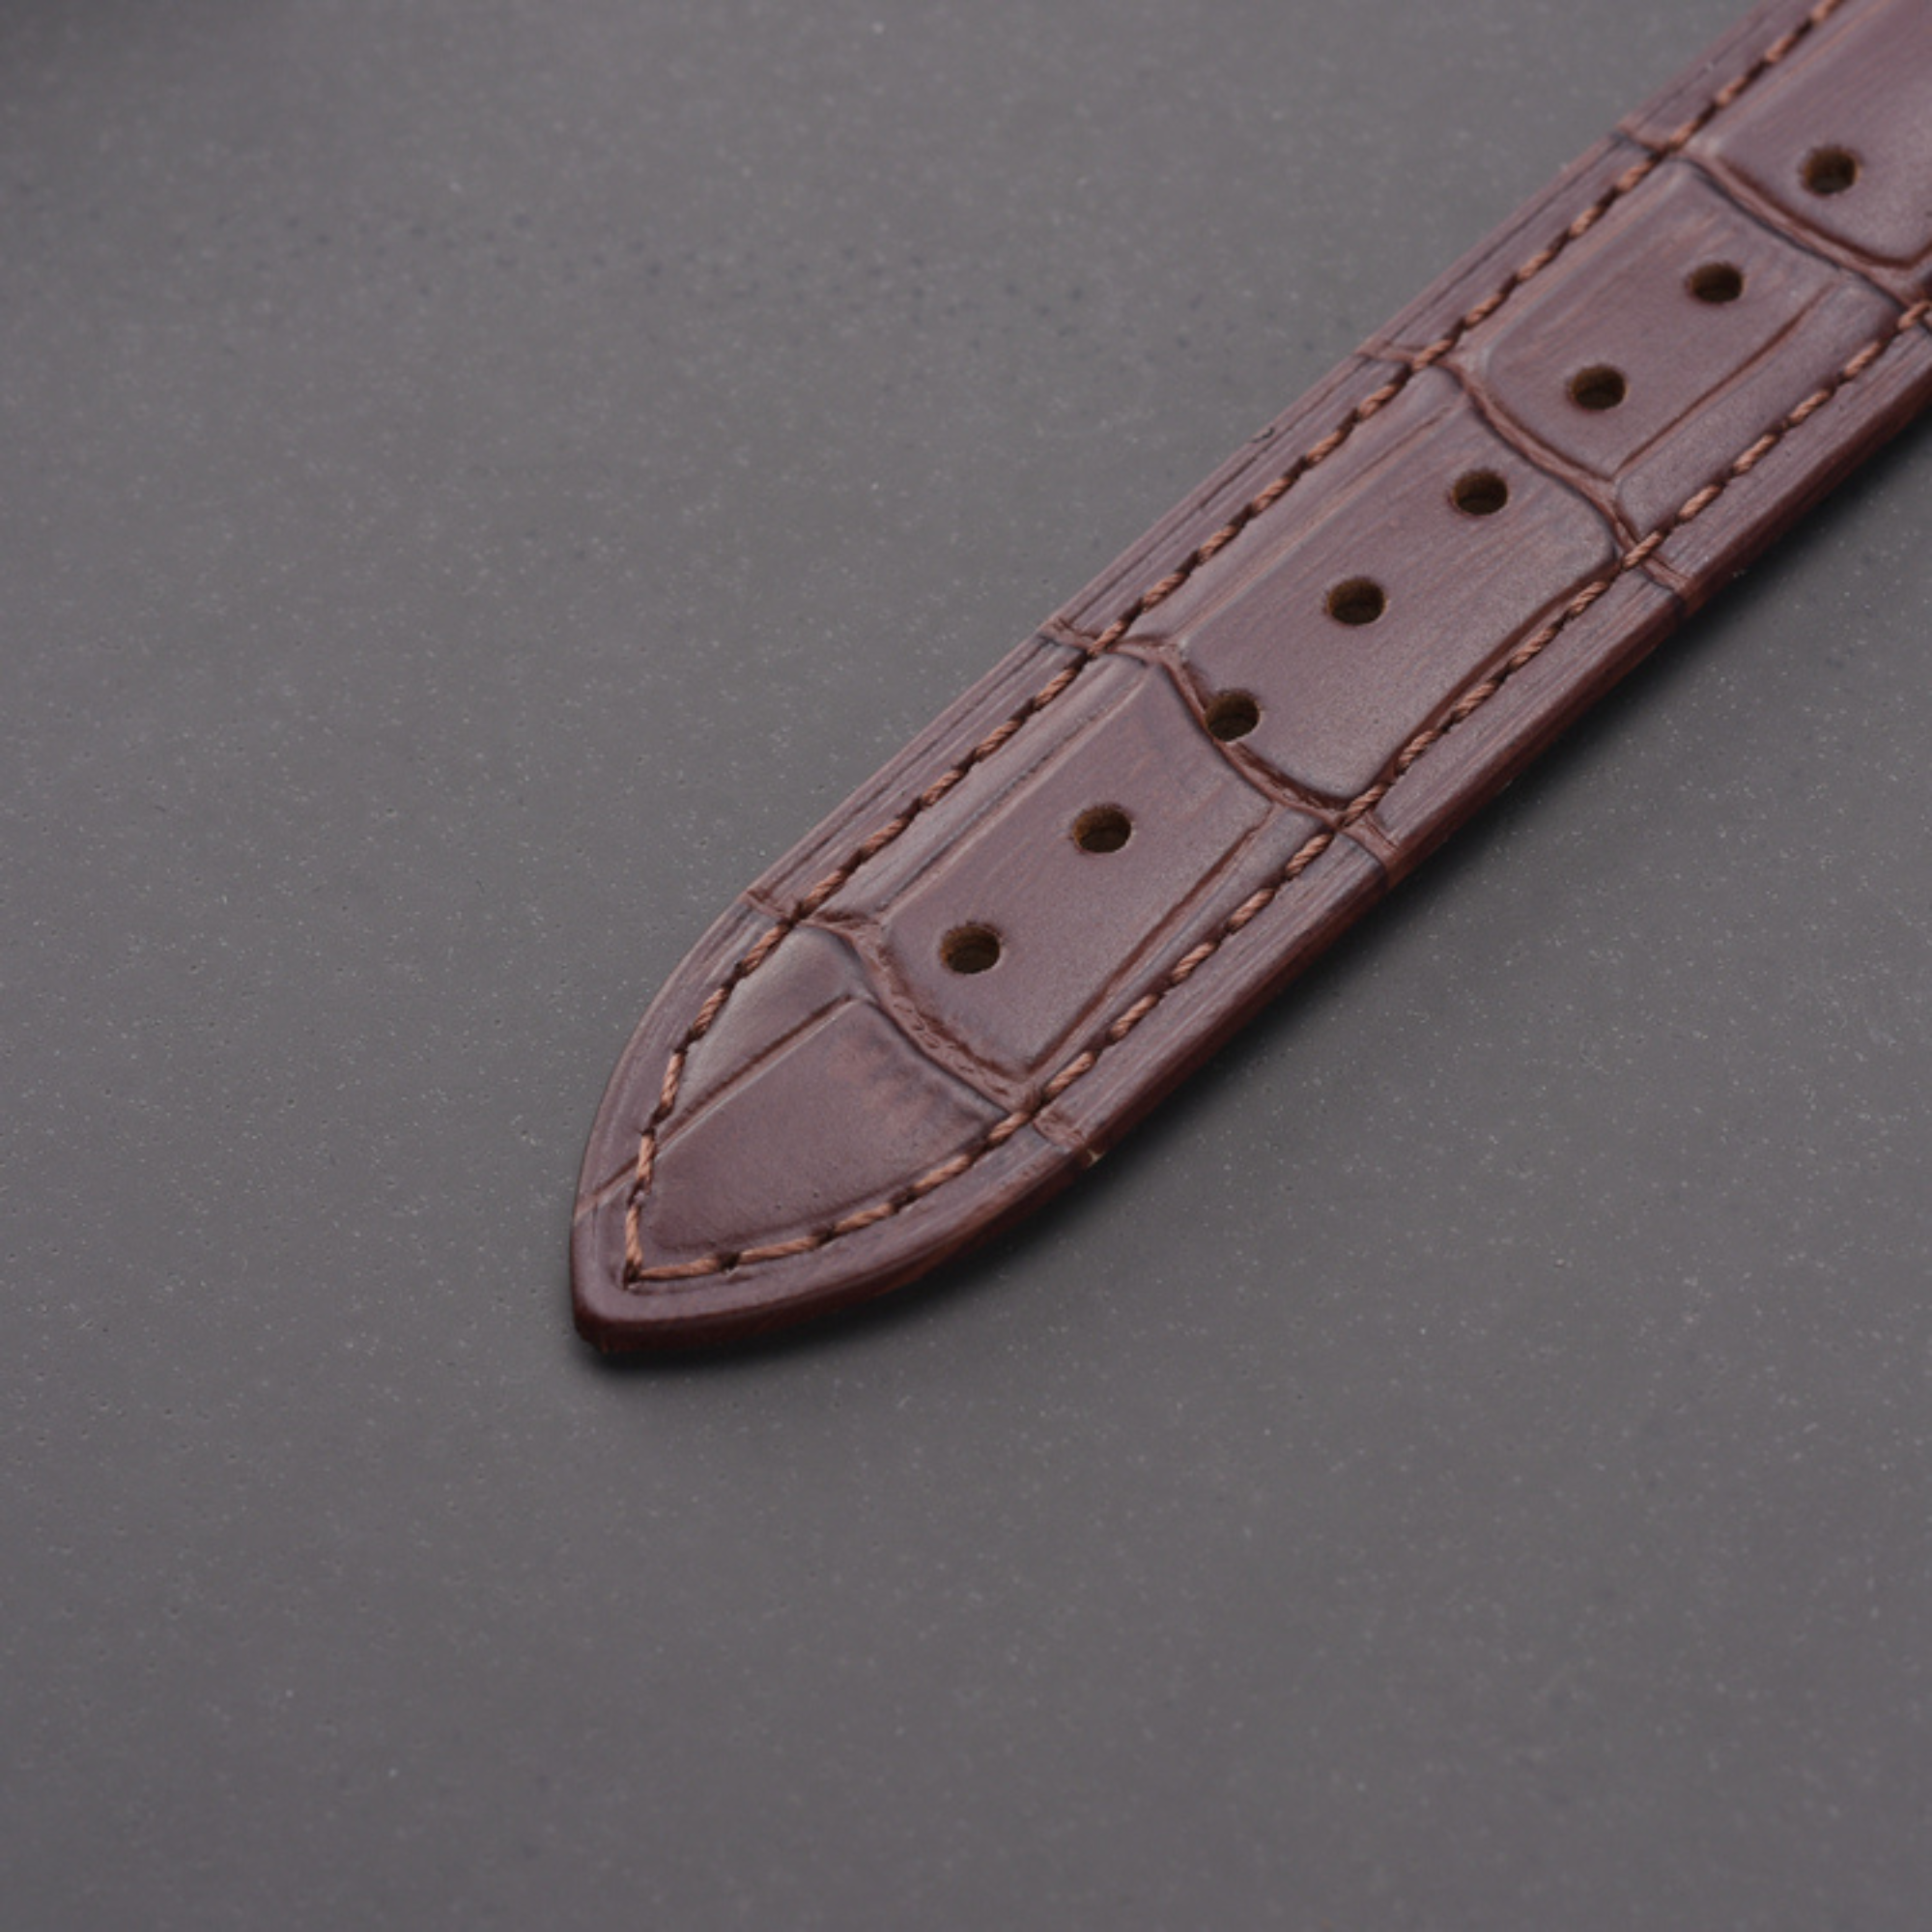 Quality Leather Watchbands Watch Band/Strap with Steel Pin buckle - Brown 20 mm watch leather strap band india online dream watches